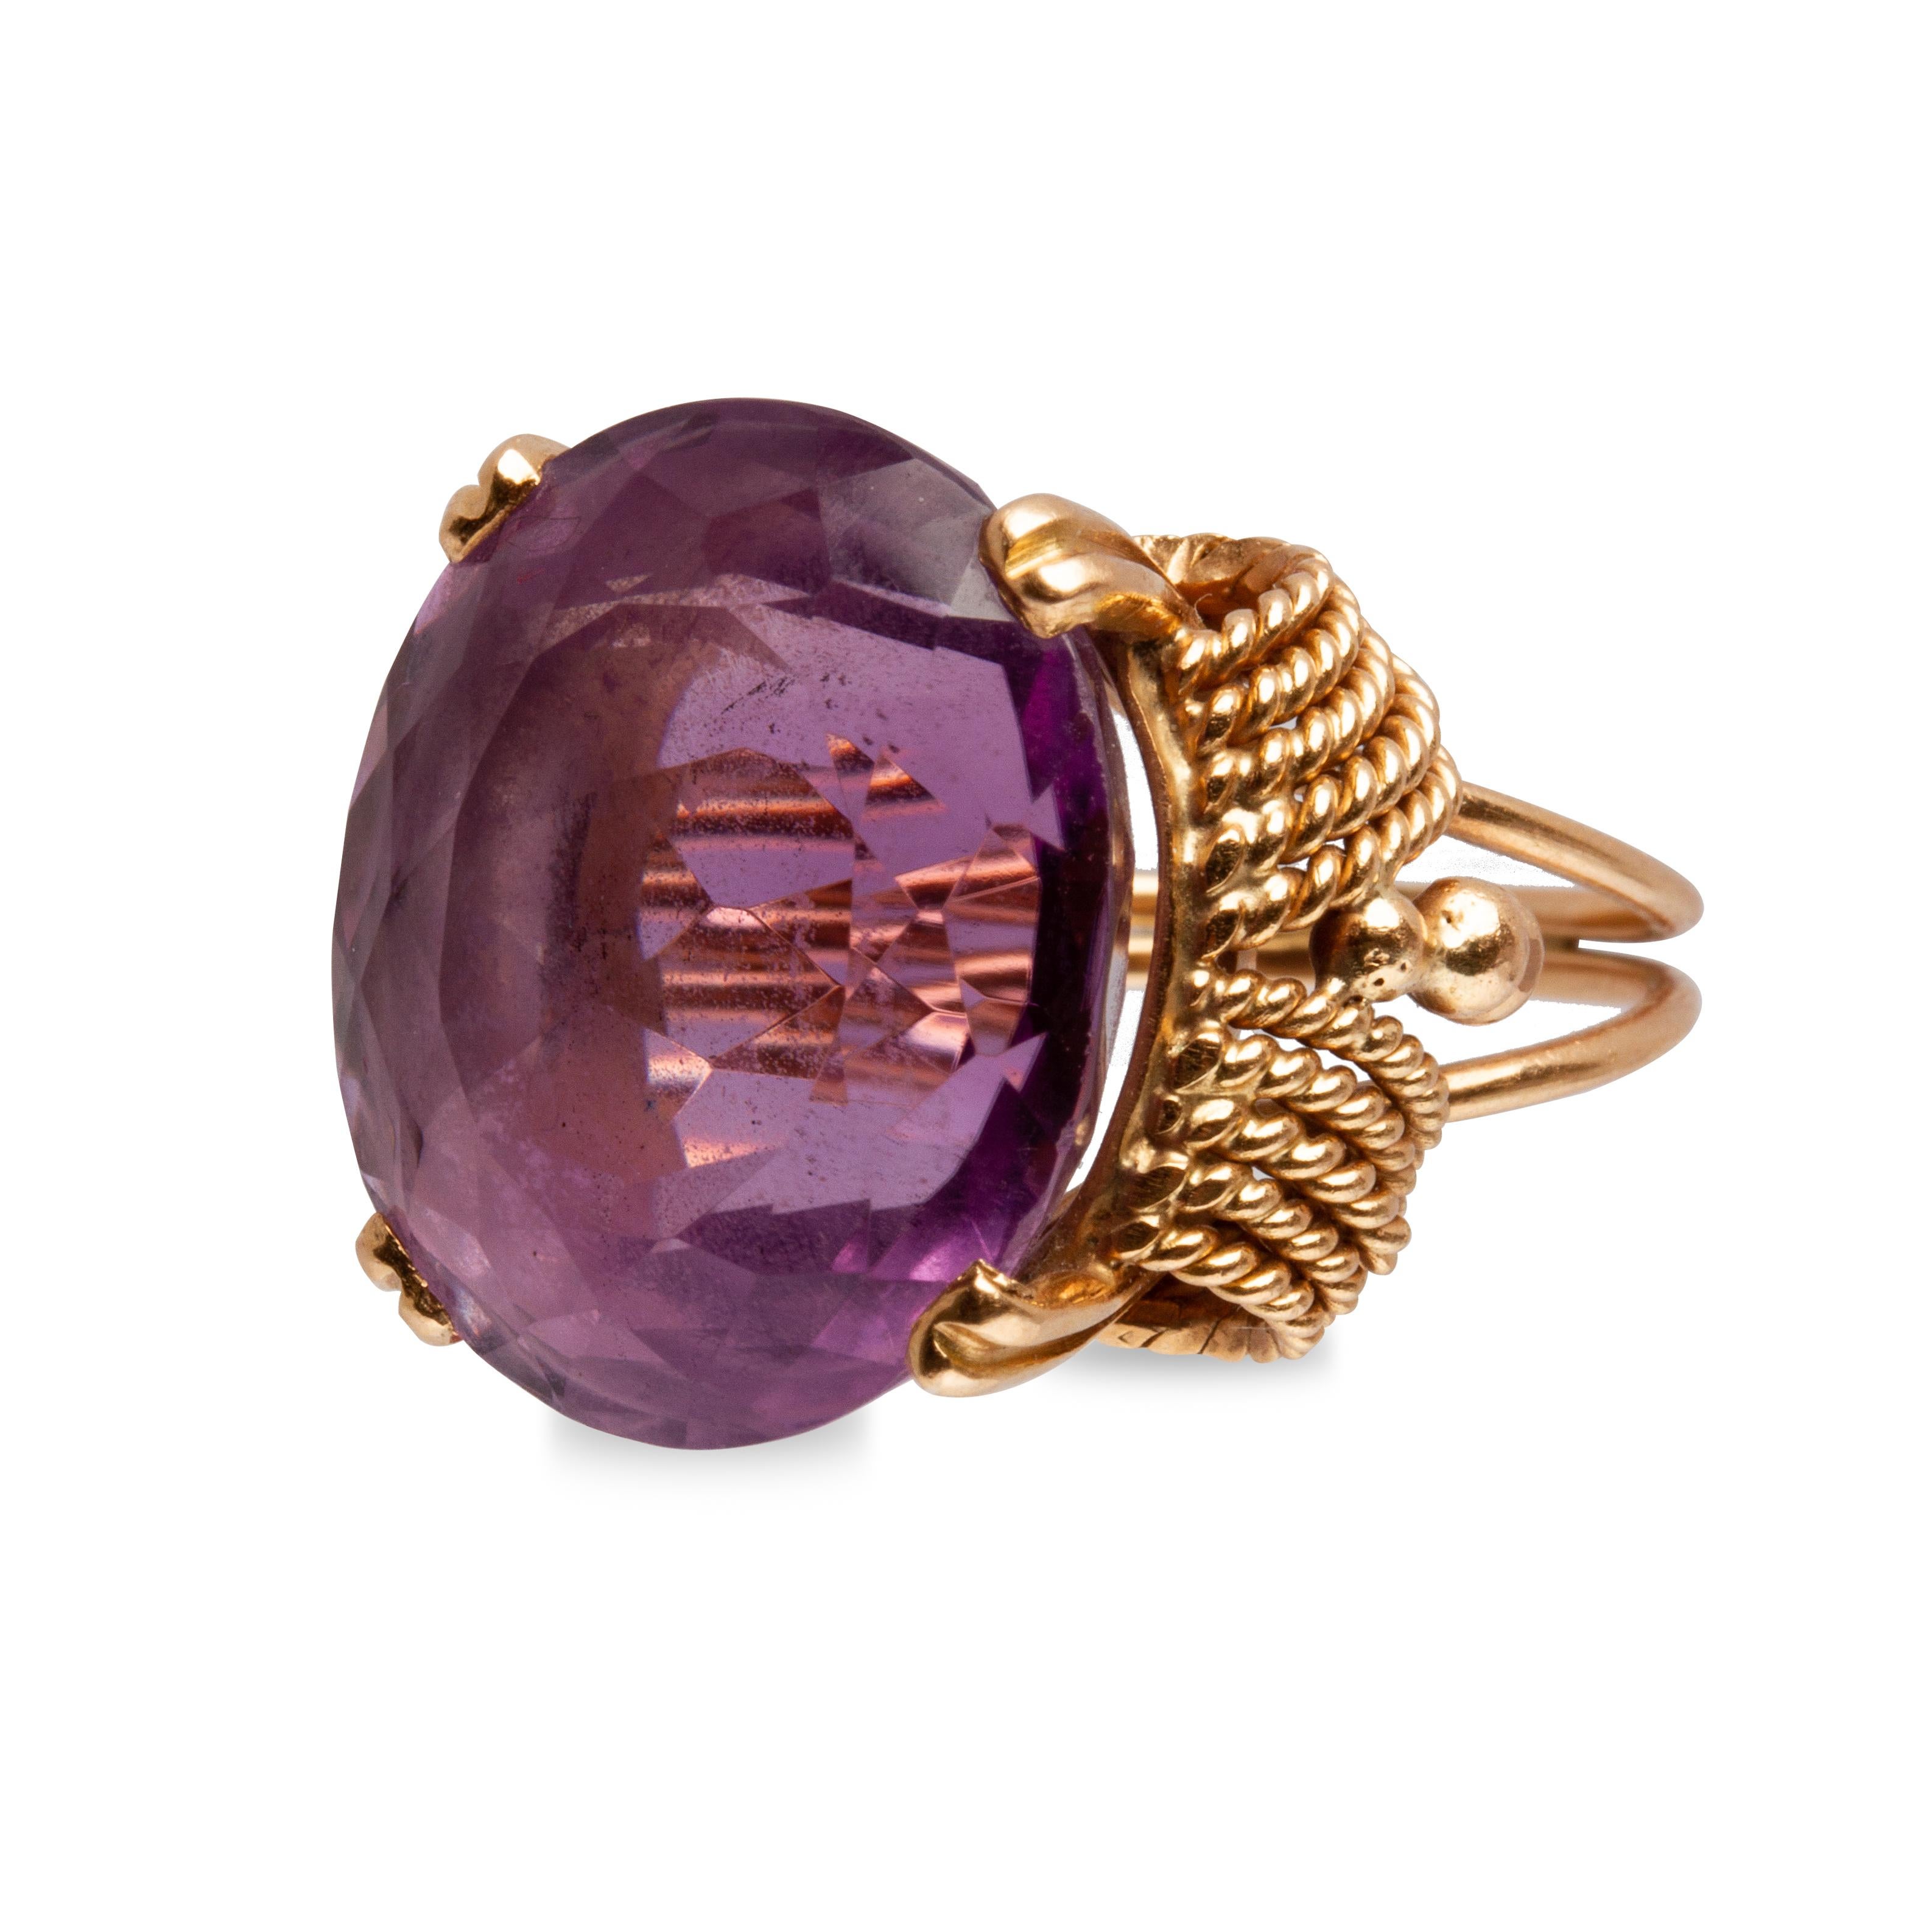 Offered is an 18k yellow gold cocktail ring, high mount 19.44 ct amethyst stone with 4-prong setting, side rope motifs, beading, and a split shank. The ring weighs approximately 7.70 dwt. 5.75 ring size; 18.5 mm x 16.4 mm x 12 mm